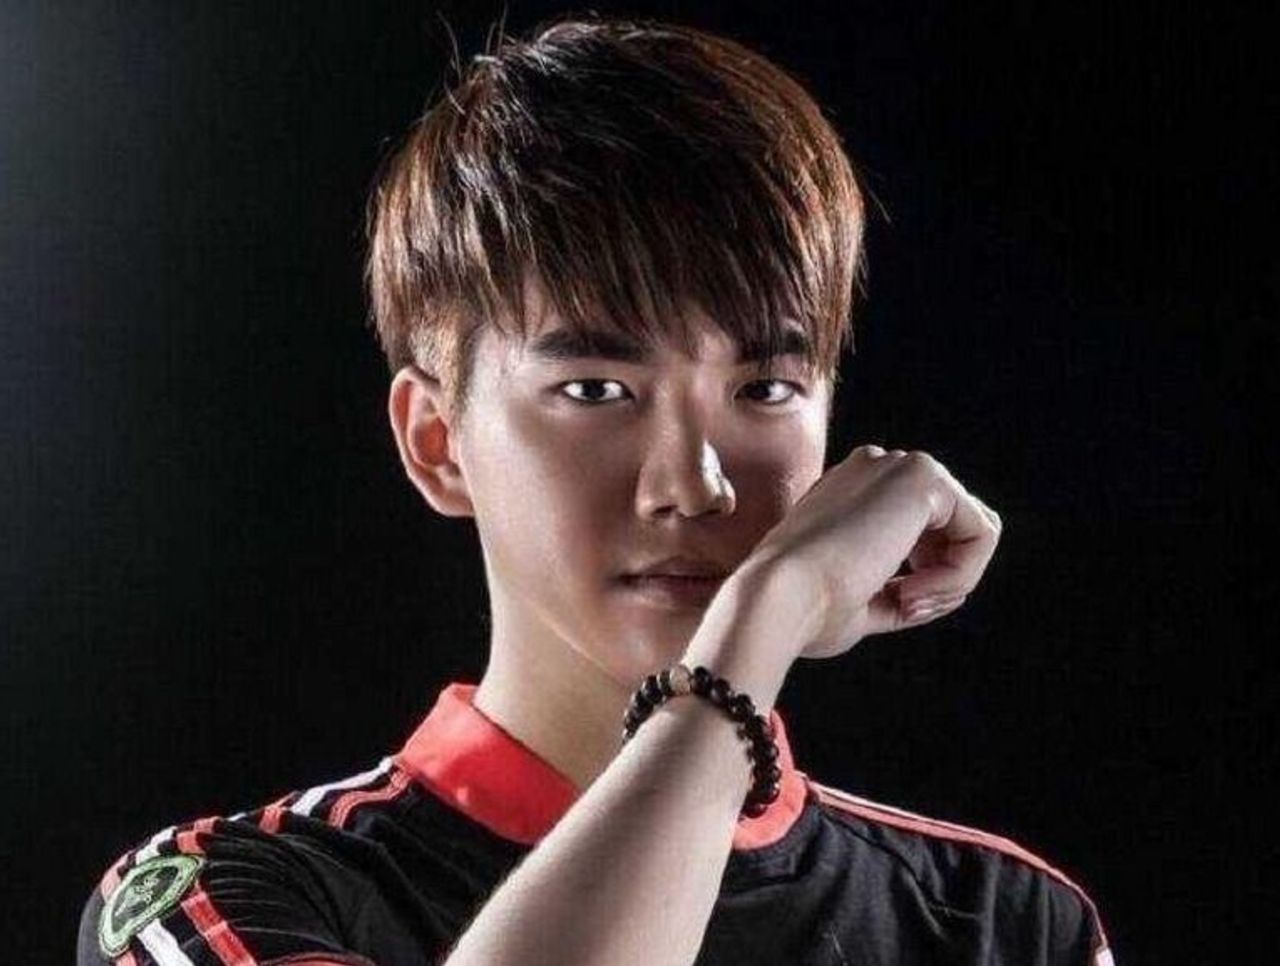 LGD Gaming’s Support Chen ‘Pyl’ Bo Announces Retirement After 7 Years With The Team